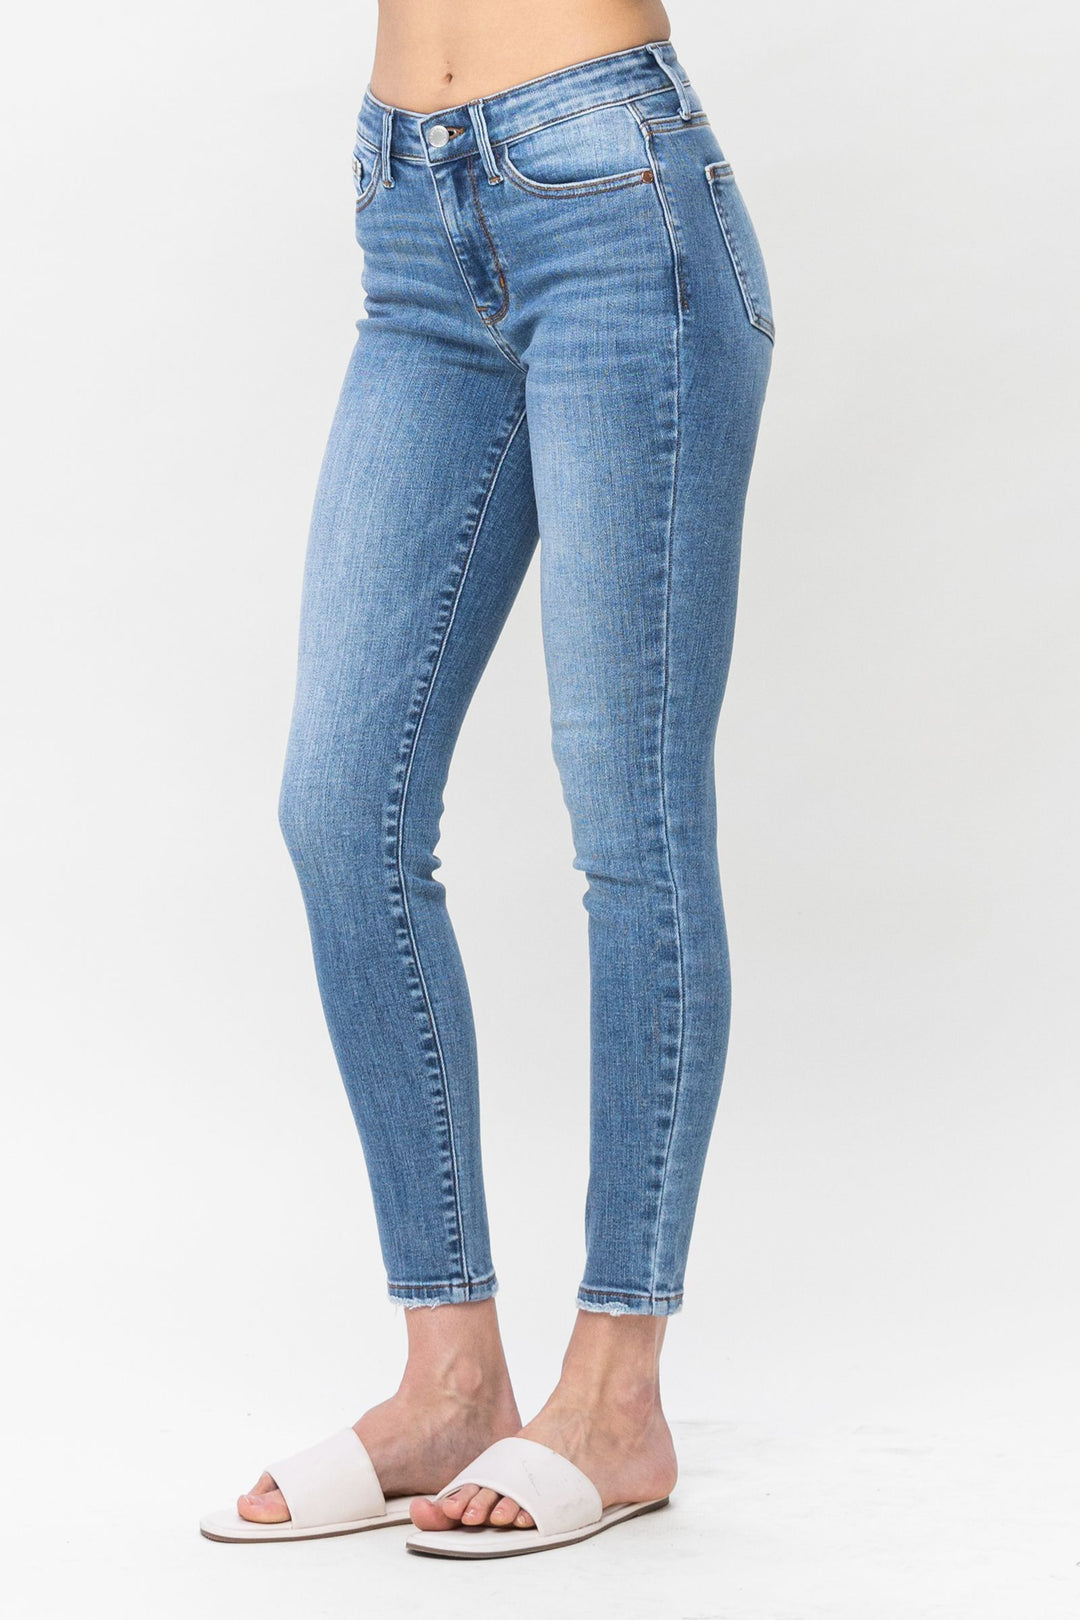 Judy Blue High Straight Leg Jeans-Jeans-Judy Blue-Evergreen Boutique, Women’s Fashion Boutique in Santa Claus, Indiana